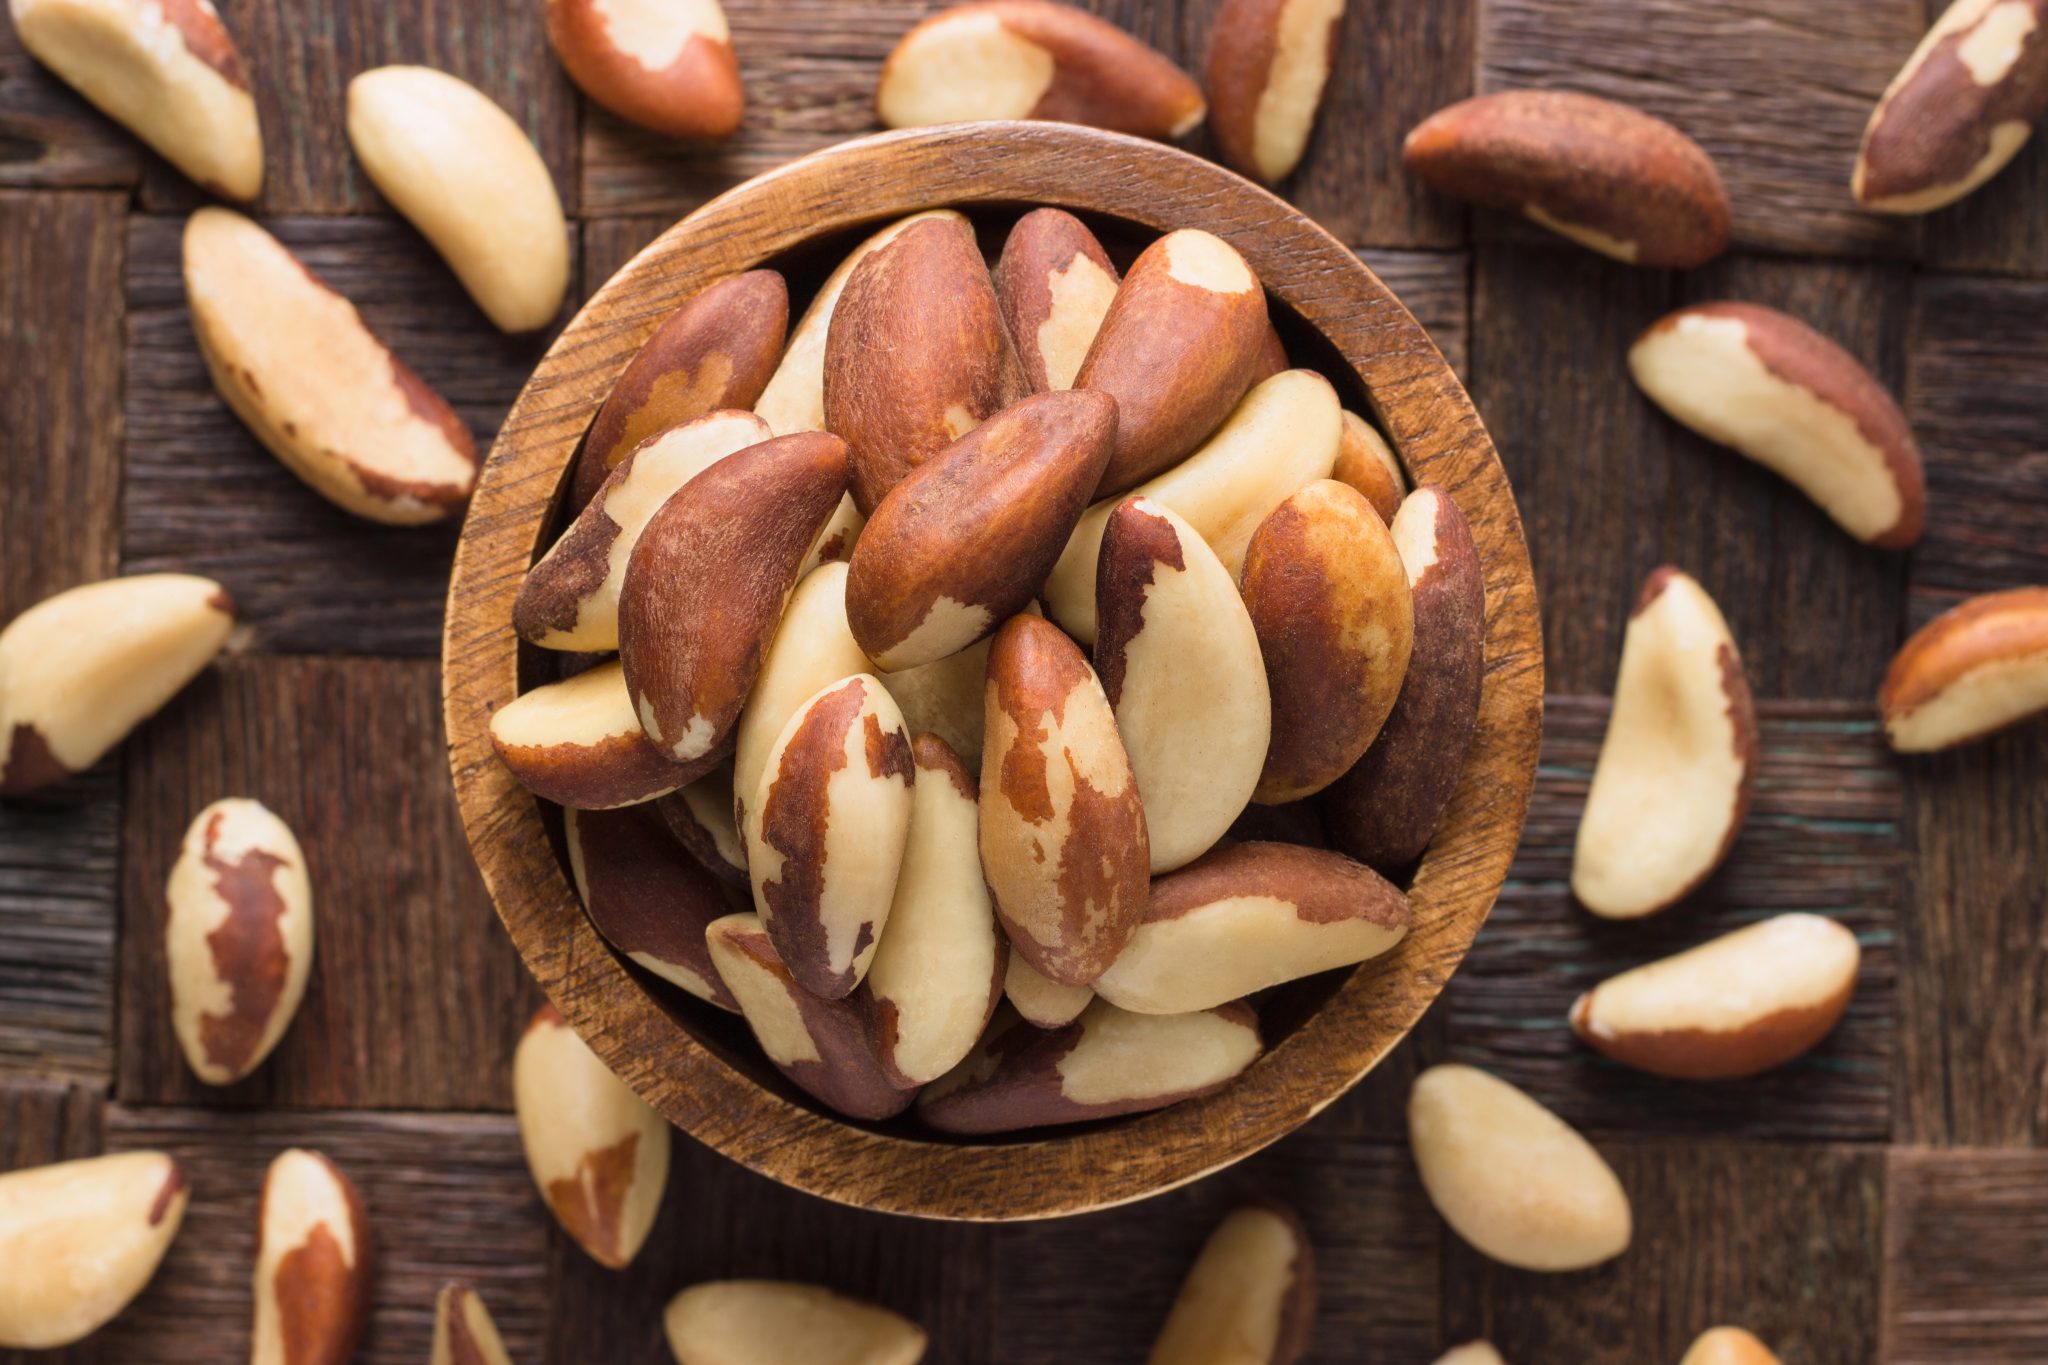 Health benefits of Brazil nuts - Dr. Pingel